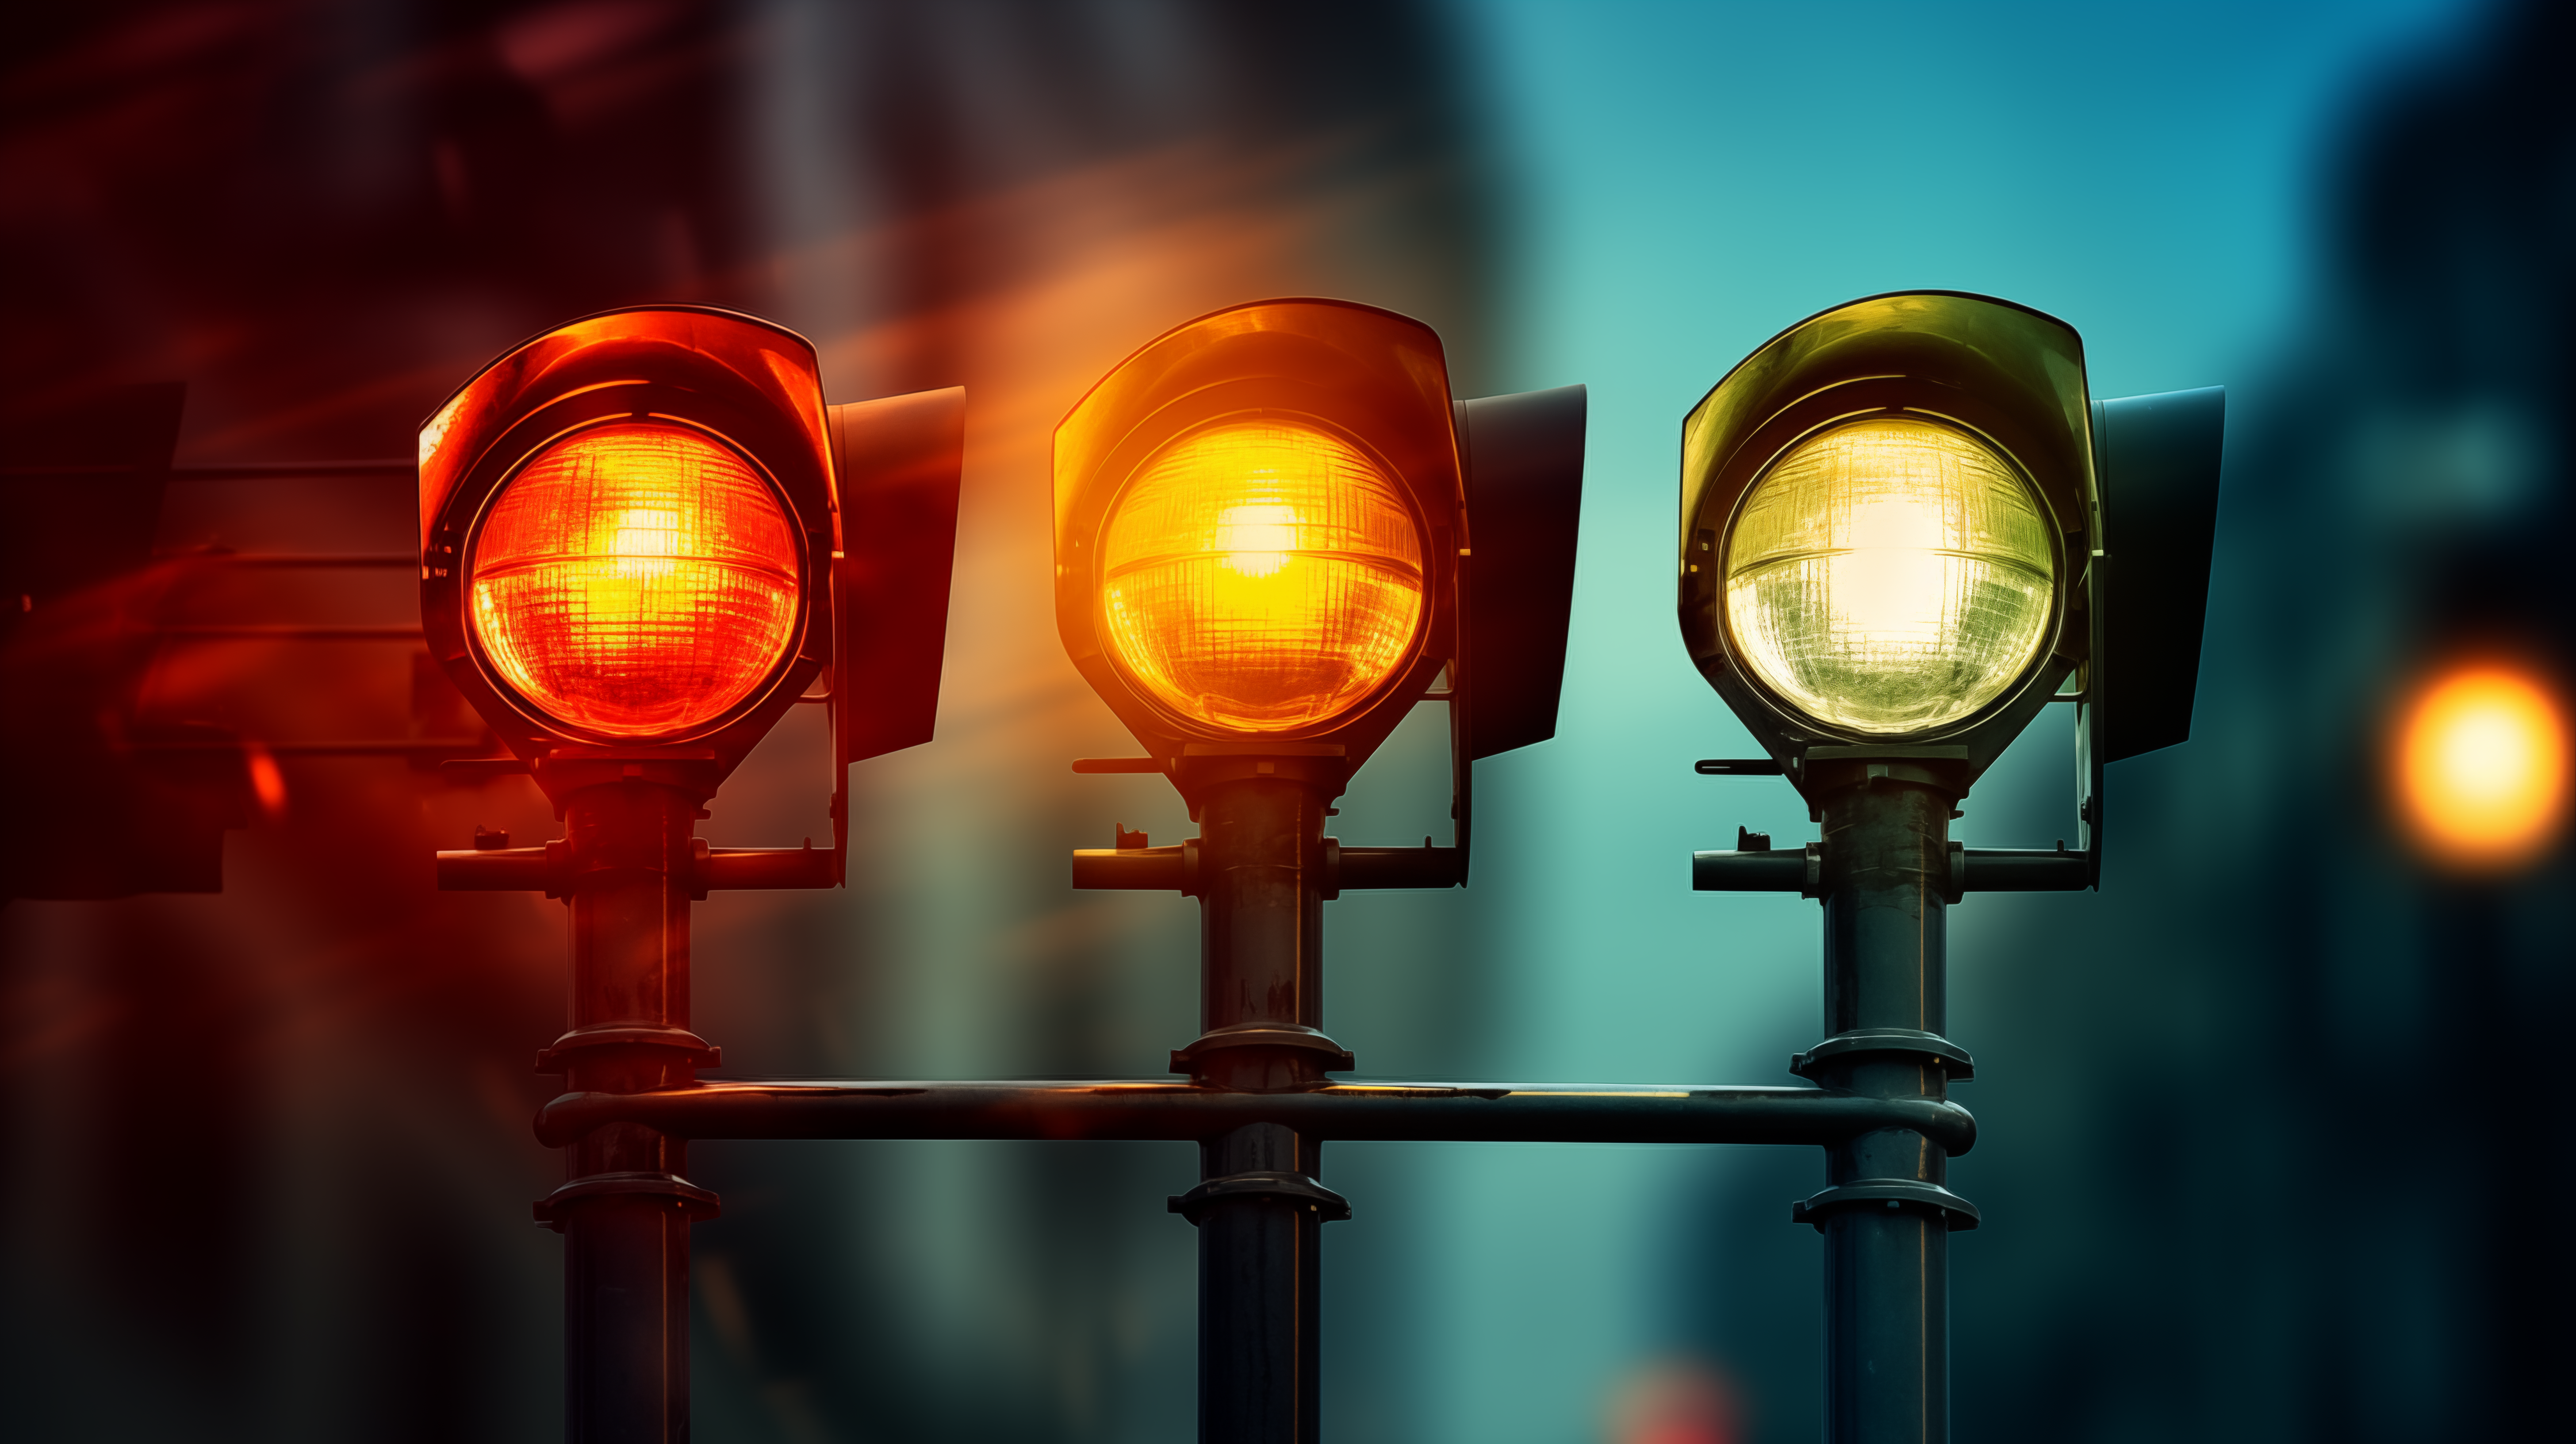 High-definition desktop wallpaper featuring a trio of traffic lights glowing red, amber, and green against a blurred city background.